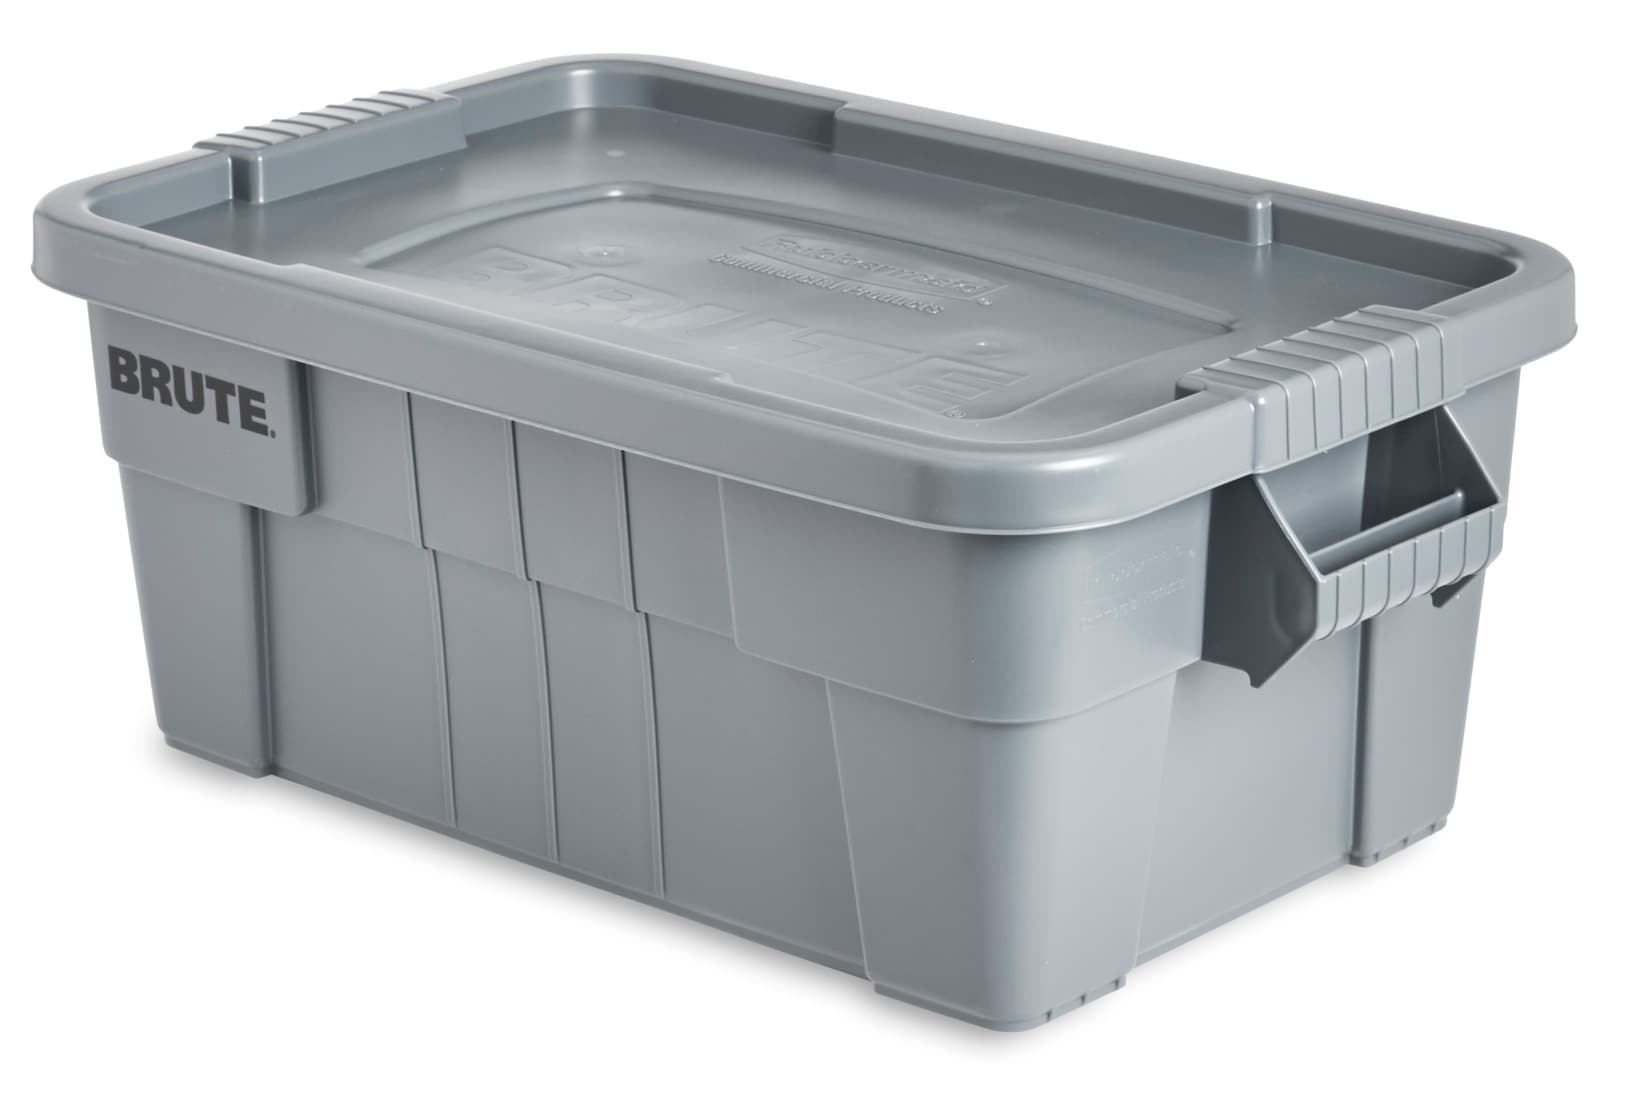 Sterilite, Rubbermaid, Homz Storage Totes. - general for sale - by owner -  craigslist